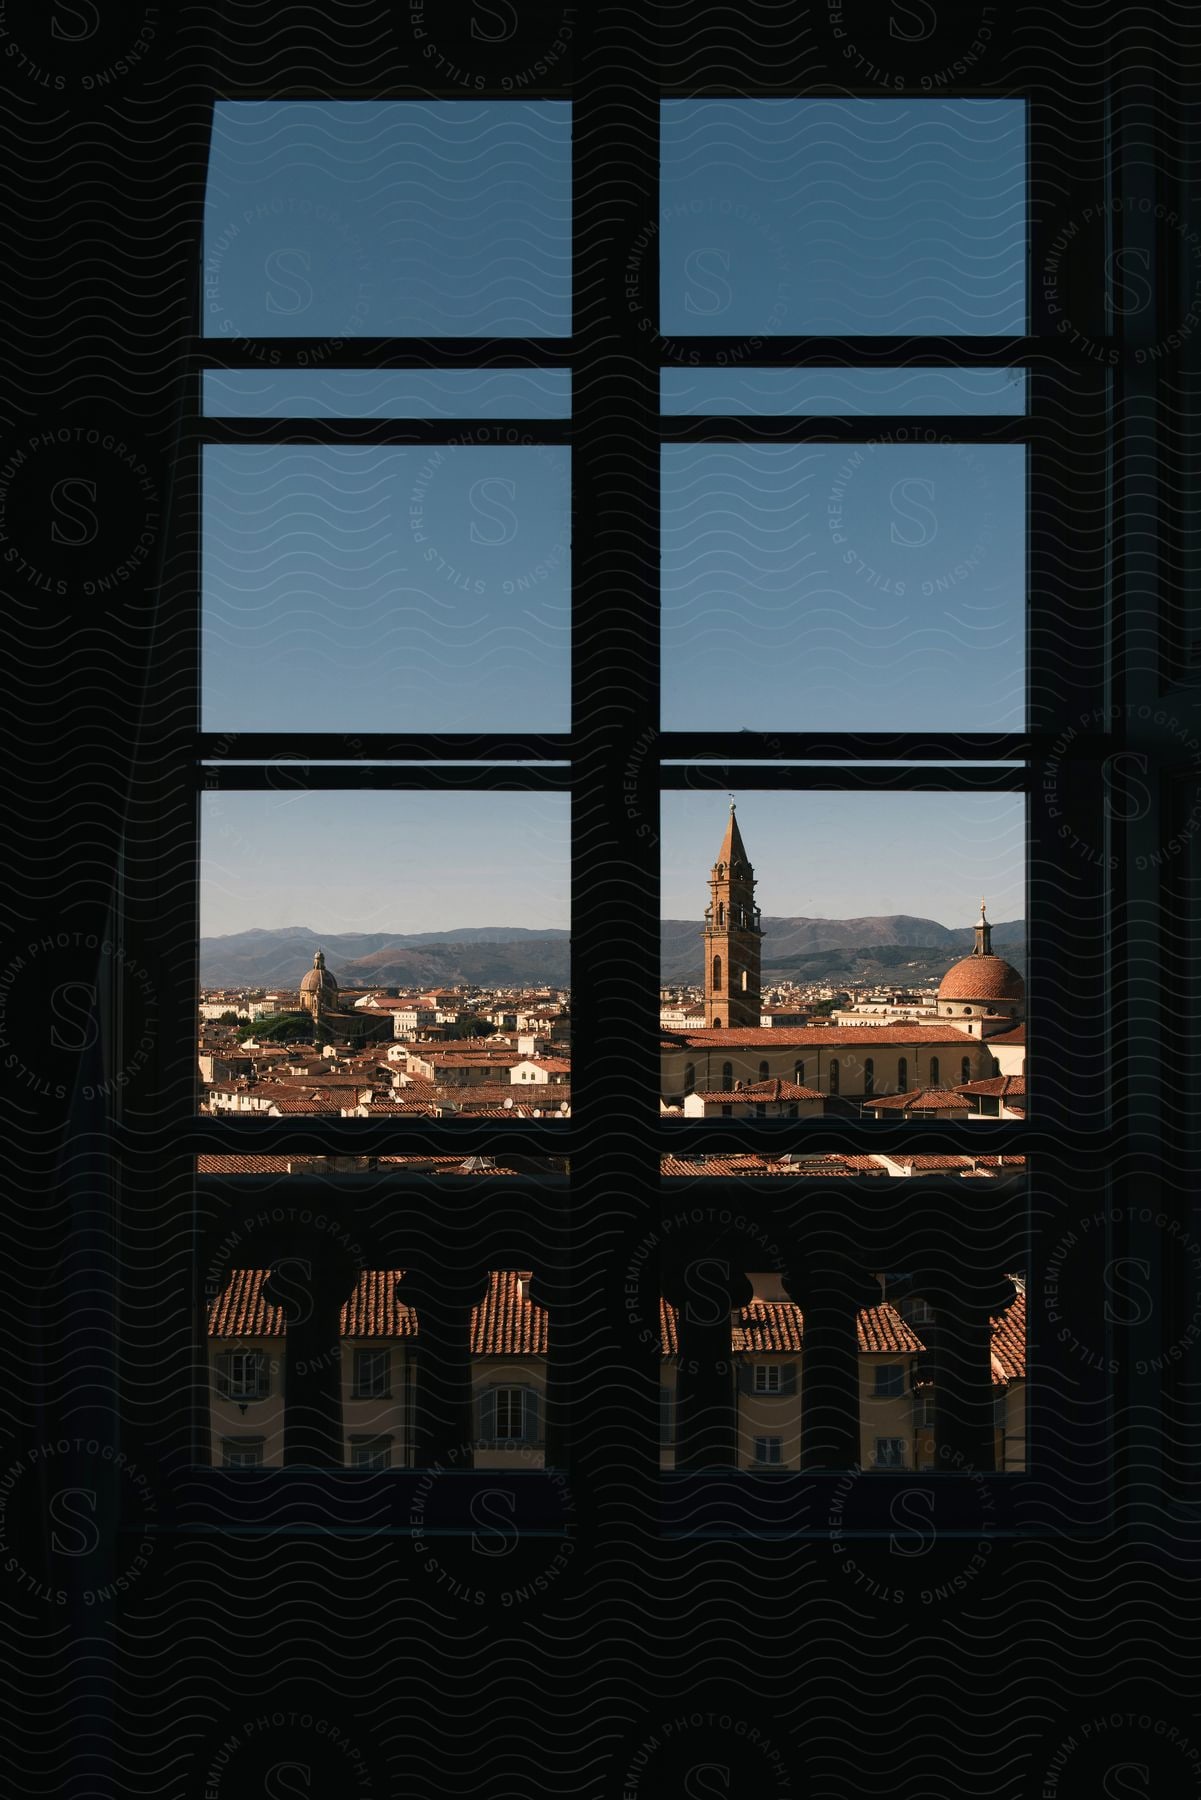 A sunny day in florence italy seen through a hotel window and balcony